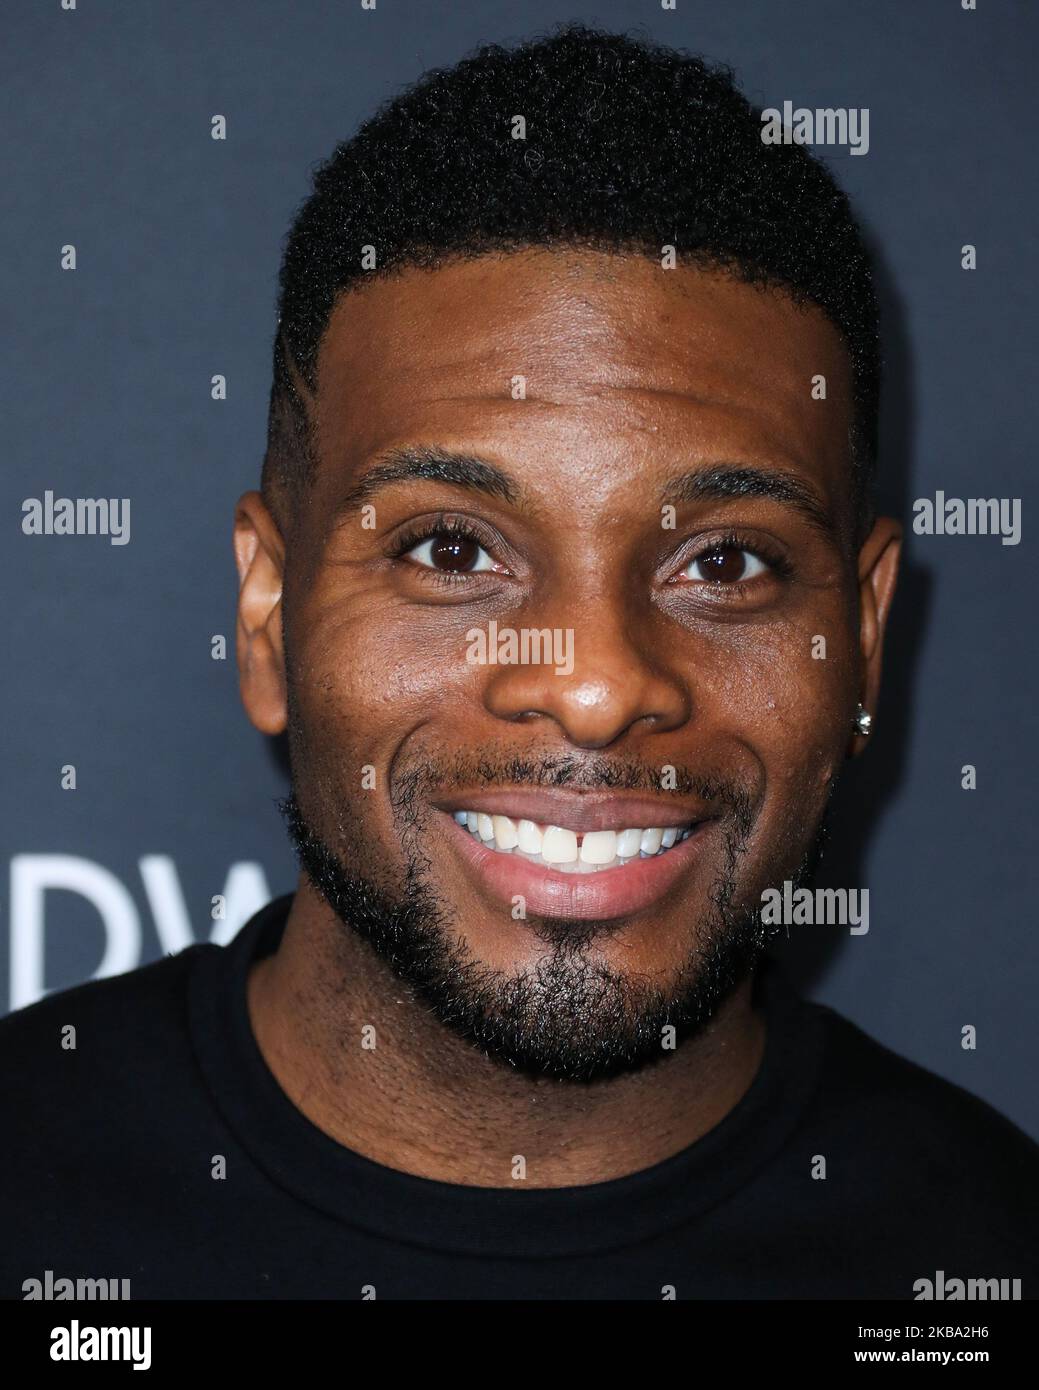 LOS ANGELES, CALIFORNIA, USA - NOVEMBER 03: Kel Mitchell arrives at ABC's 'Dancing With The Stars' Season 28 Top Six Finalists Party held at Dominique Ansel at The Grove on November 4, 2019 in Los Angeles, California, United States. (Photo by Xavier Collin/Image Press Agency/NurPhoto) Stock Photo